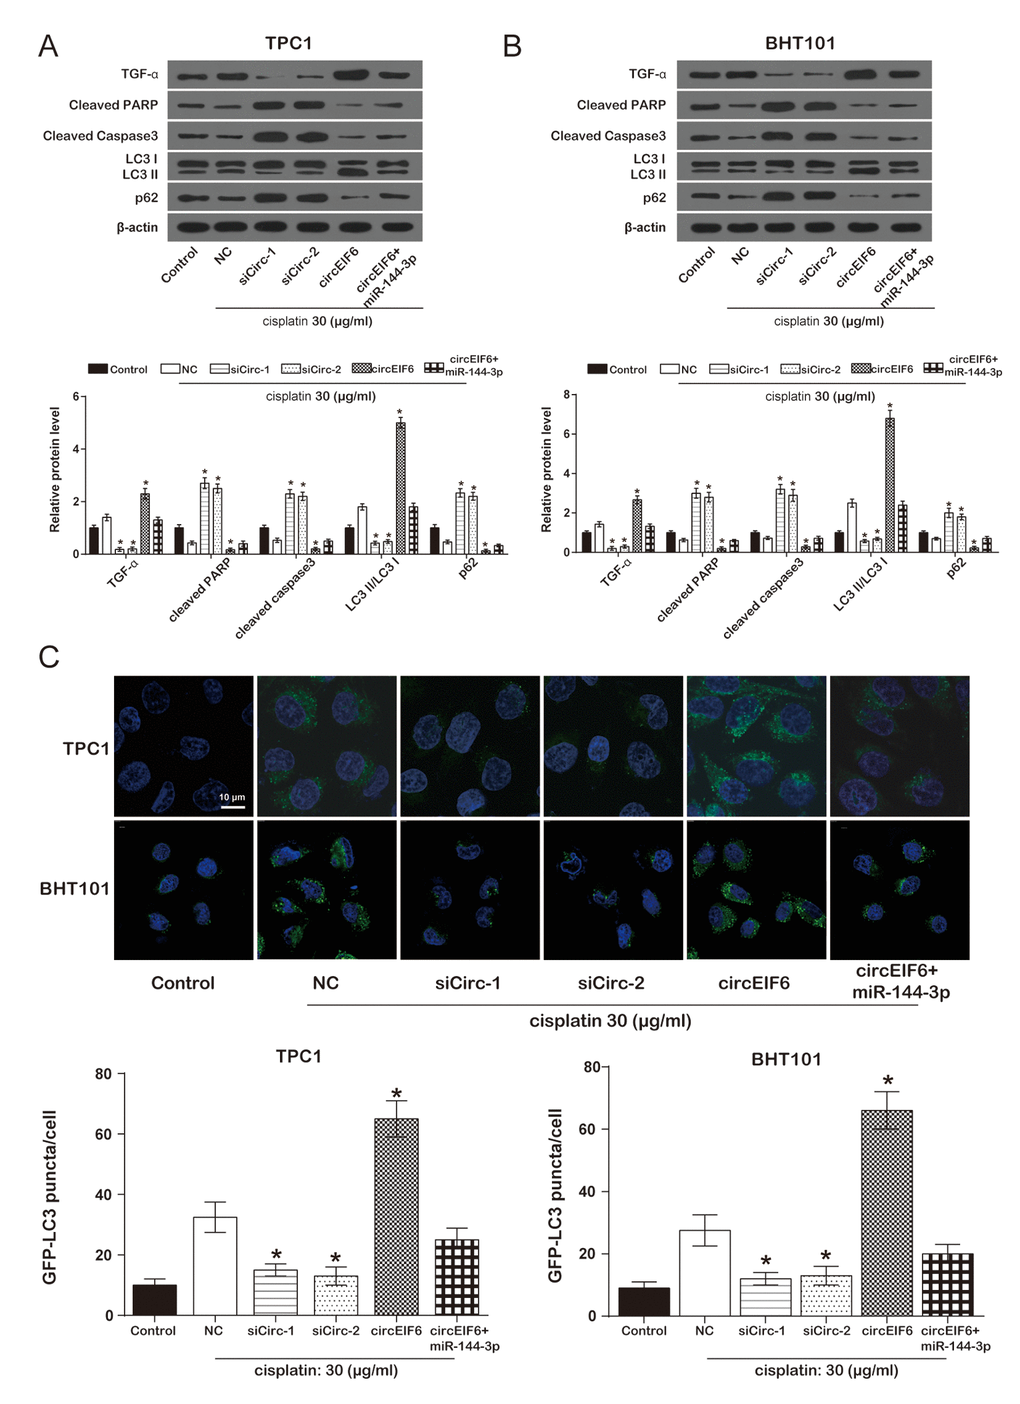 Overexpression of circEIF6 could enhance autophagy and inhibit apoptosis in the TPC1 and BHT101 cells with cisplatin treatment. (A) Western blot was used to detect the protein of TGF-α, cleaved PPAR, cleaved caspase3, LC3B, p62 expressions. Cleaved PARP and caspase-3 were proteins related to apoptosis; LC3 II/LC3 I ratio and p62 were related to autophagy. *P B) GFP-LC3 puncta was less in siCirc-1 or siCirc-2 group and more in circEIF6 group after treated with cisplatin, *P 